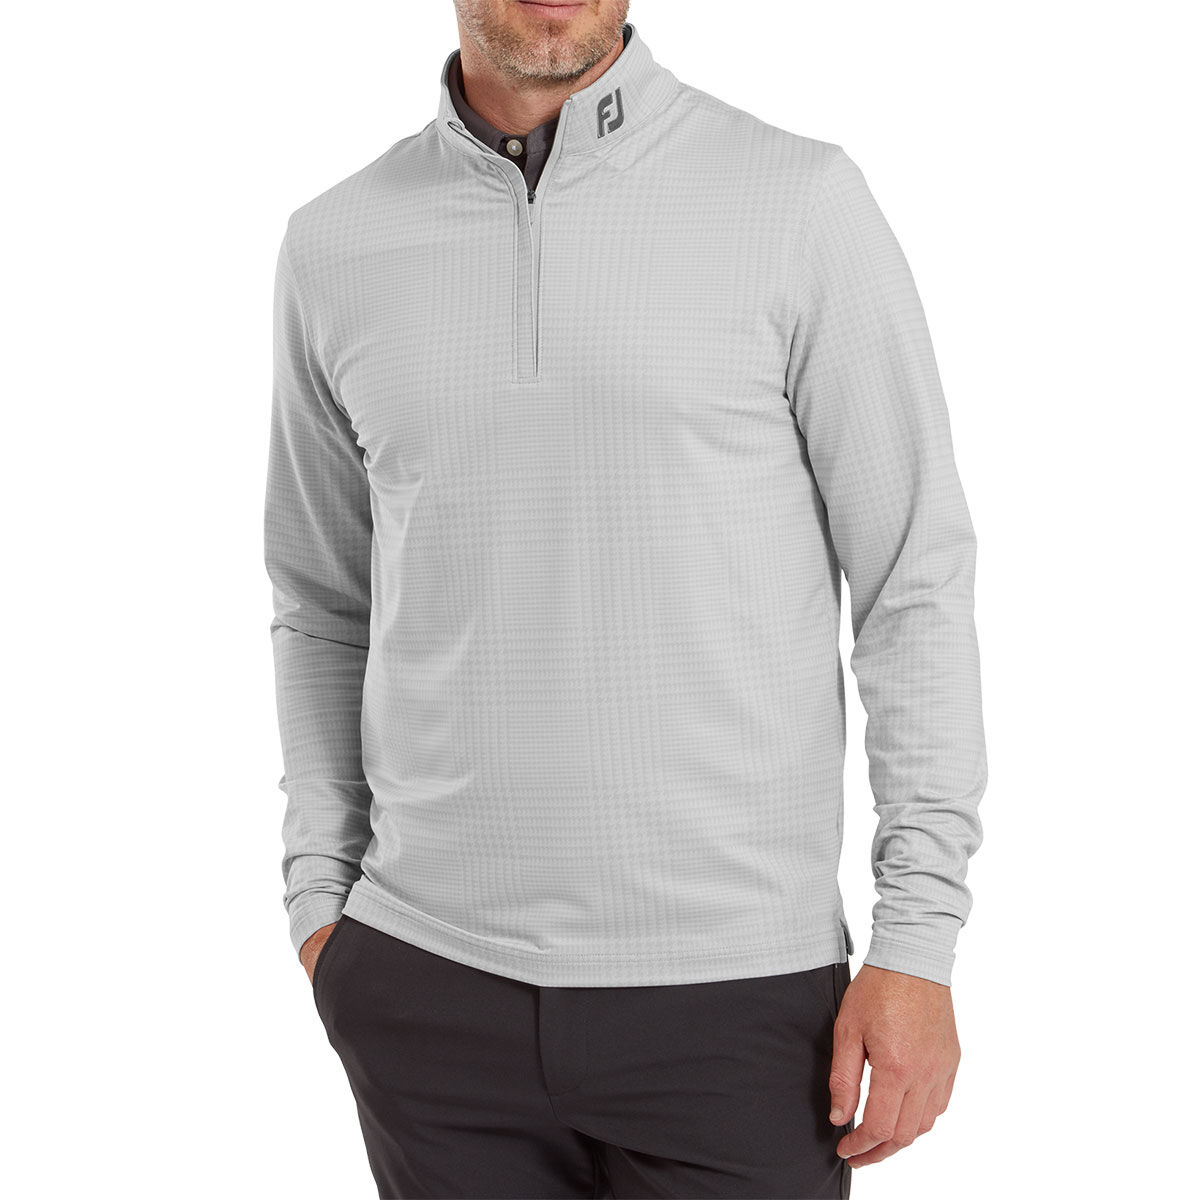 FootJoy Men’s Glen Plaid Chill-Out Golf Midlayer, Mens, Grey cliff, Small | American Golf